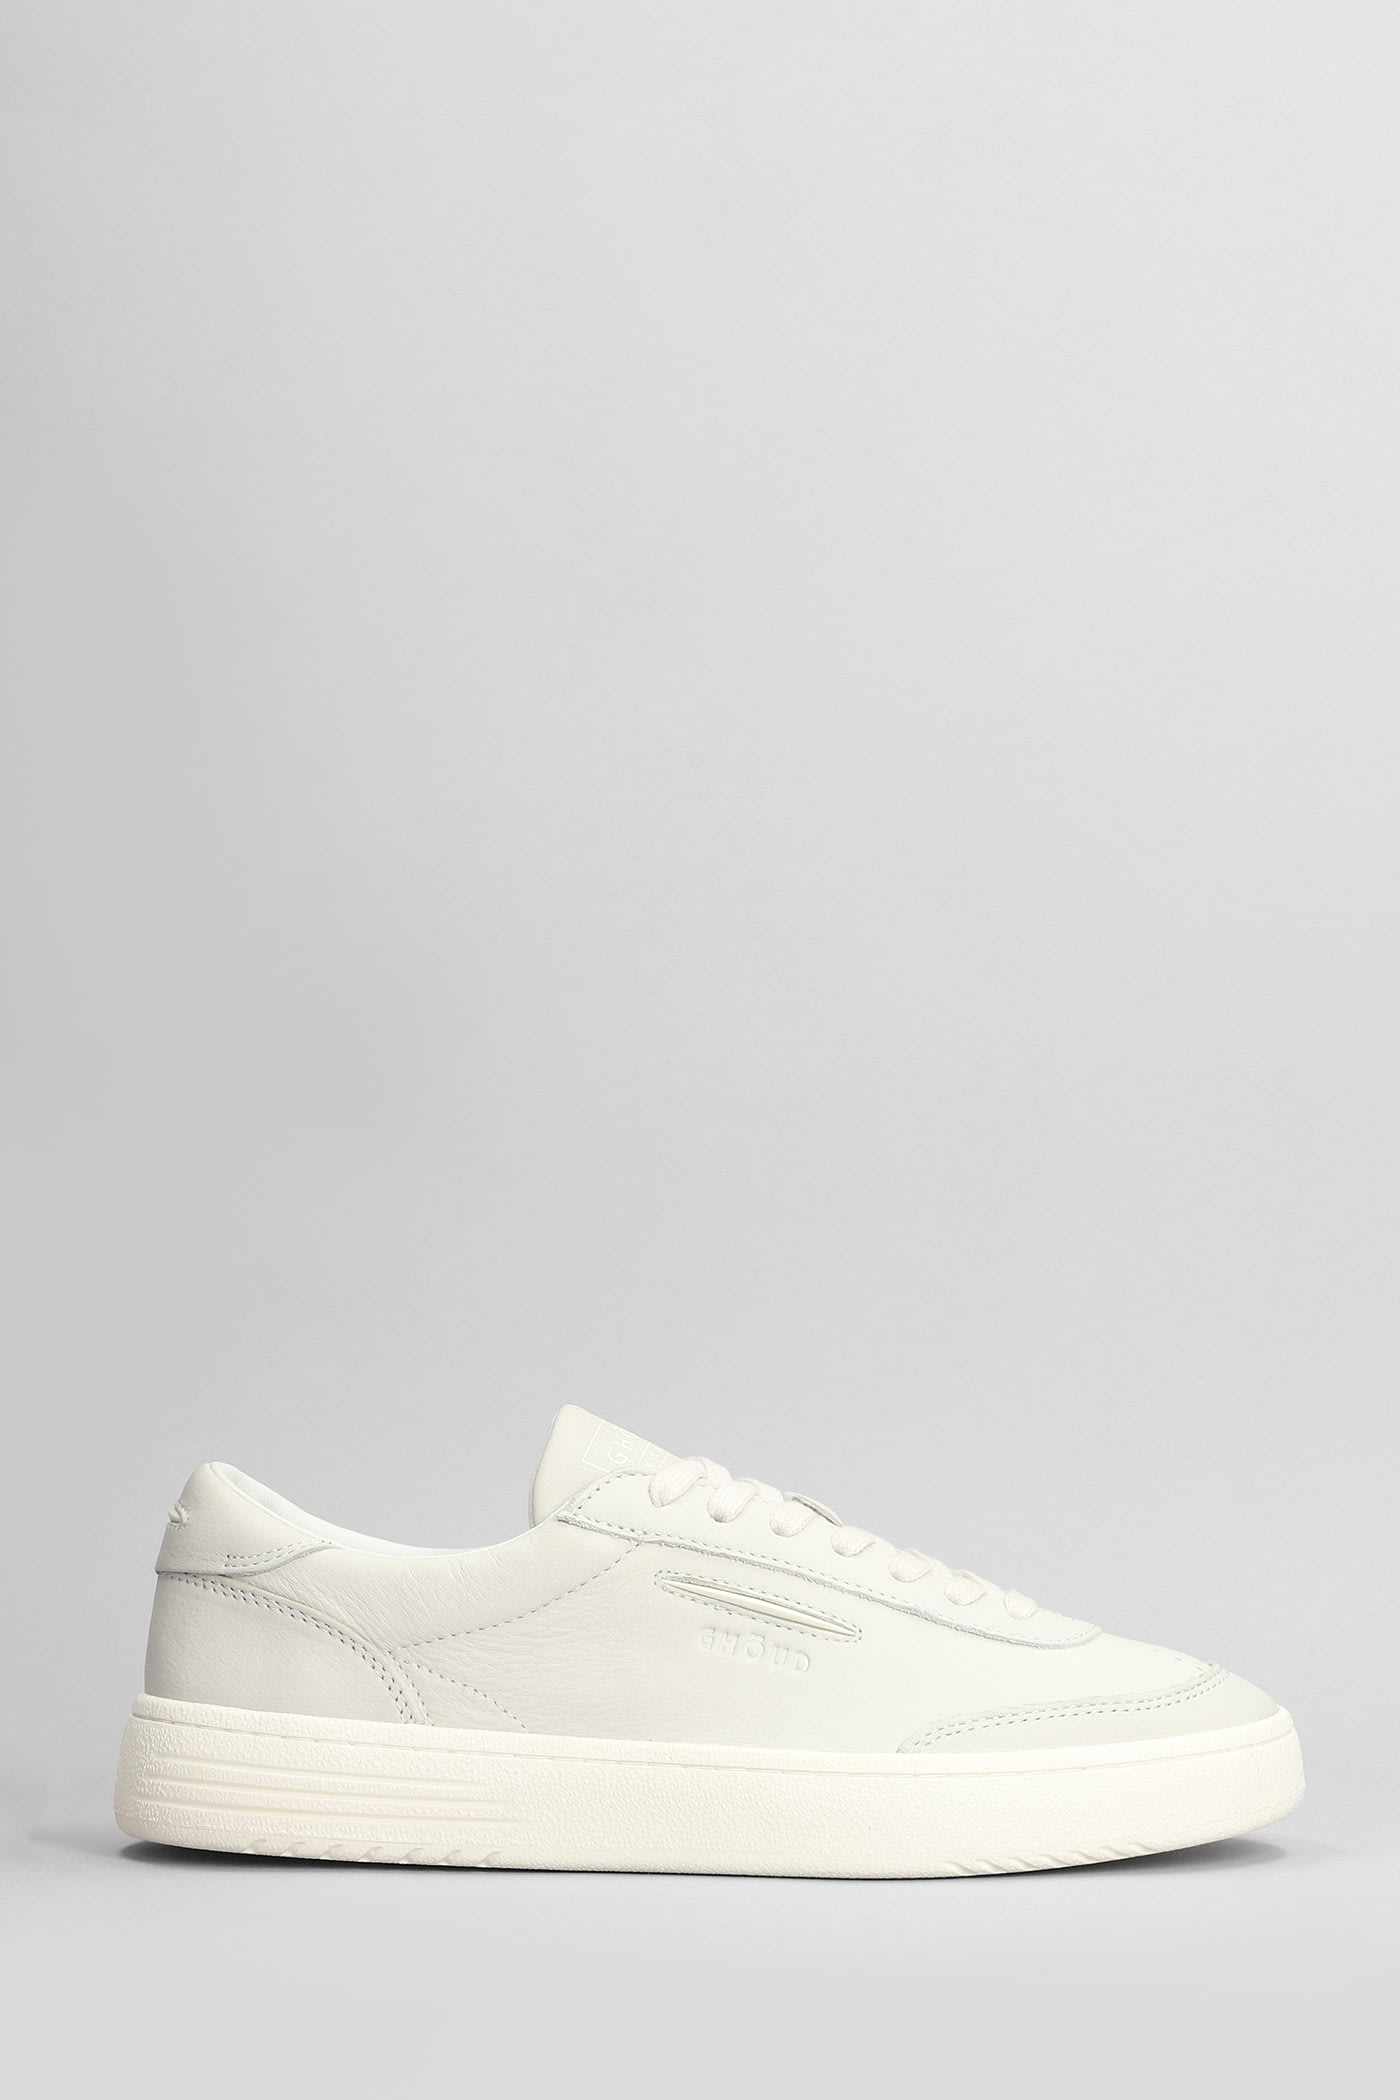 Ghoud Lindo Low Sneakers In Grey Leather In White